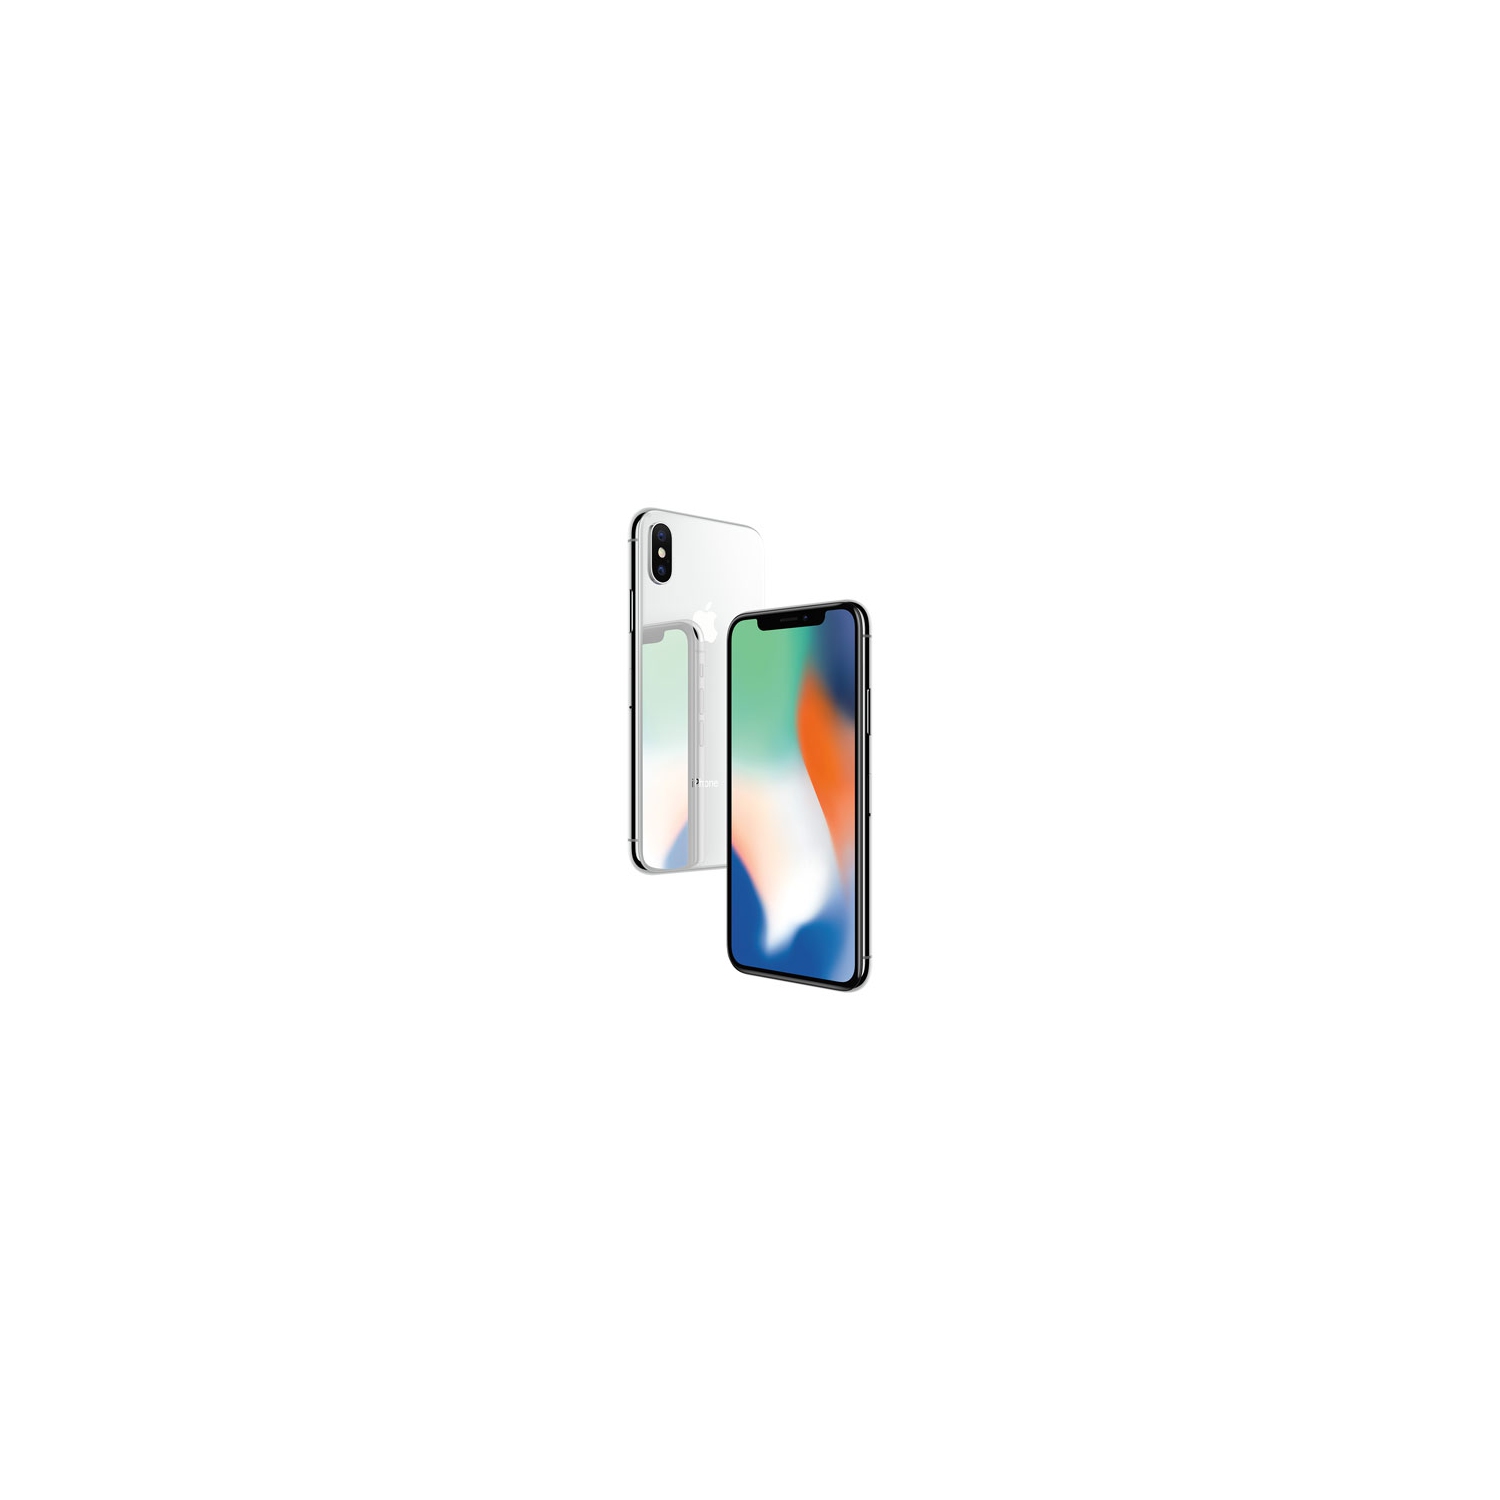 Refurbished (Excellent) - Apple iPhone X 64GB - Silver - Unlocked